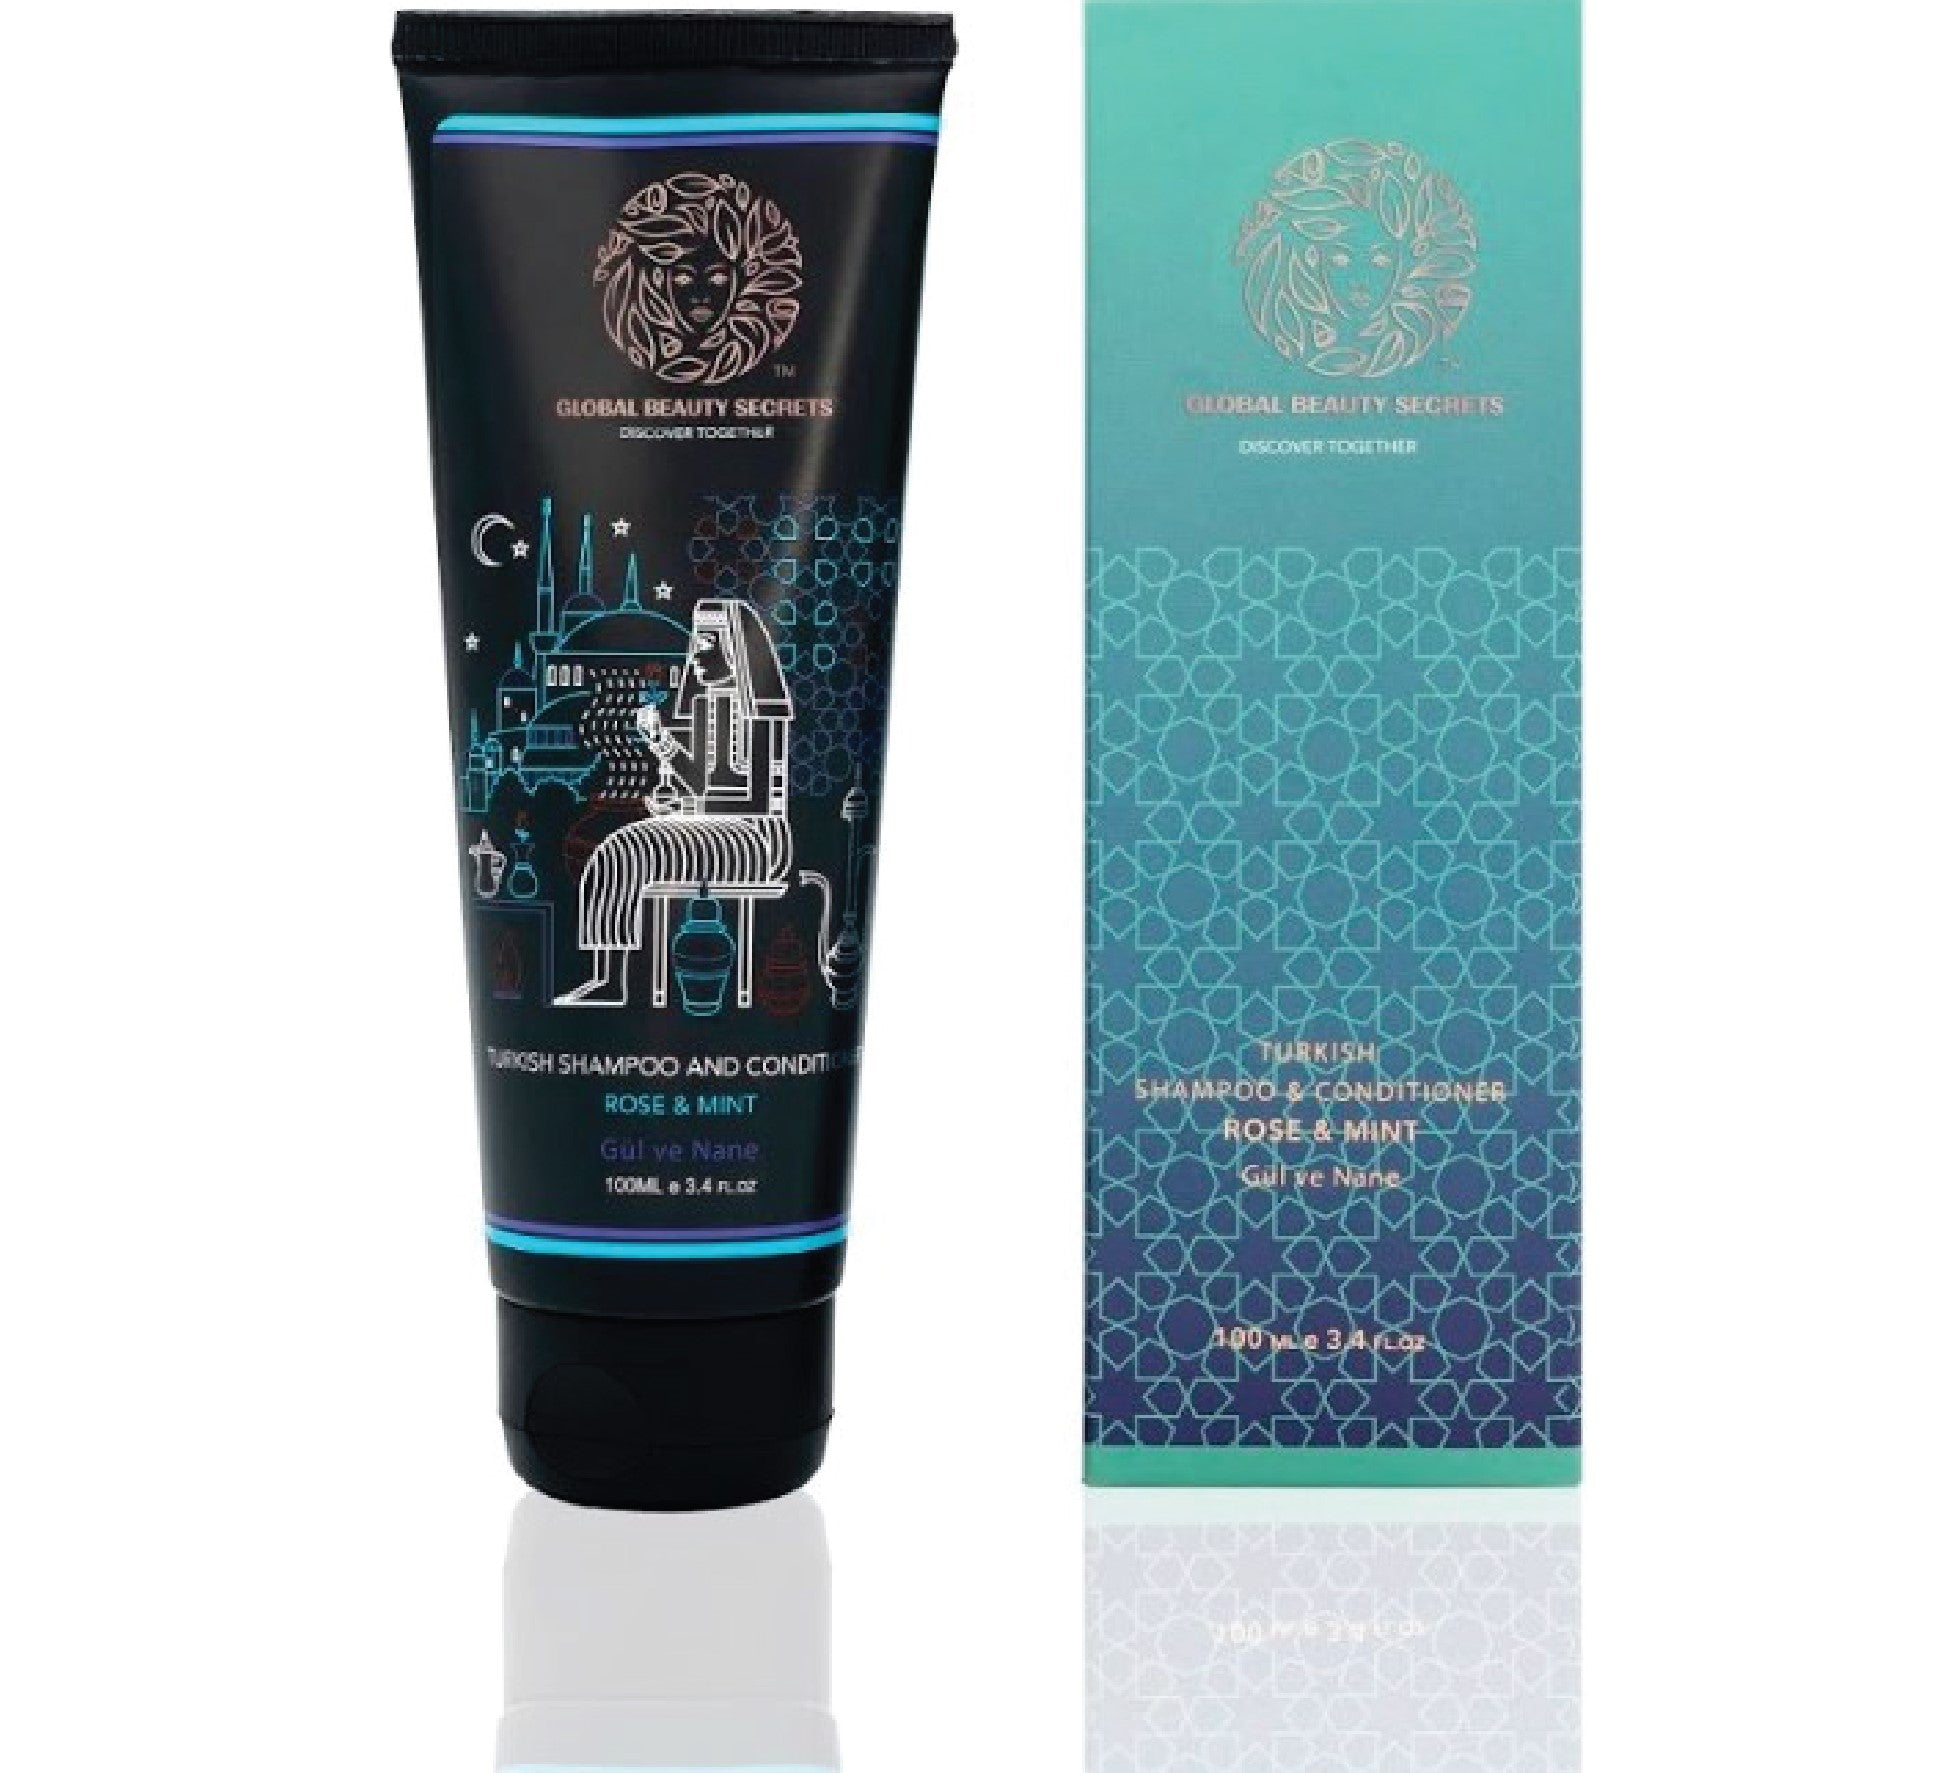 Global Beauty Secrets Turkish Rose and Mint Shampoo and Conditioner